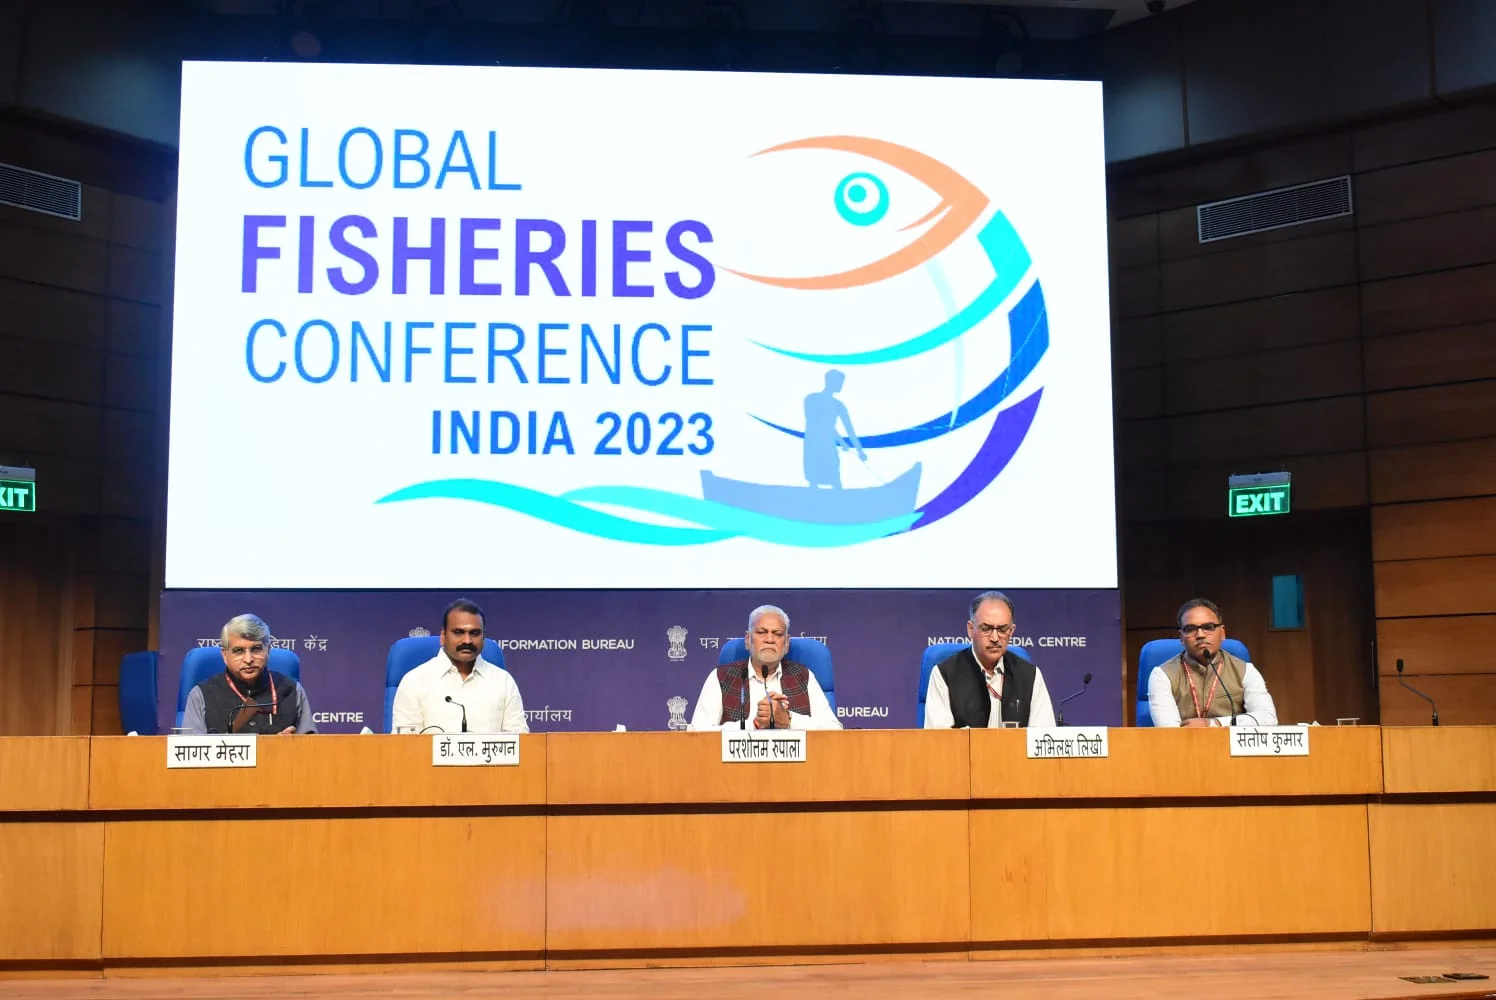 Global Fisheries Conference India 2023